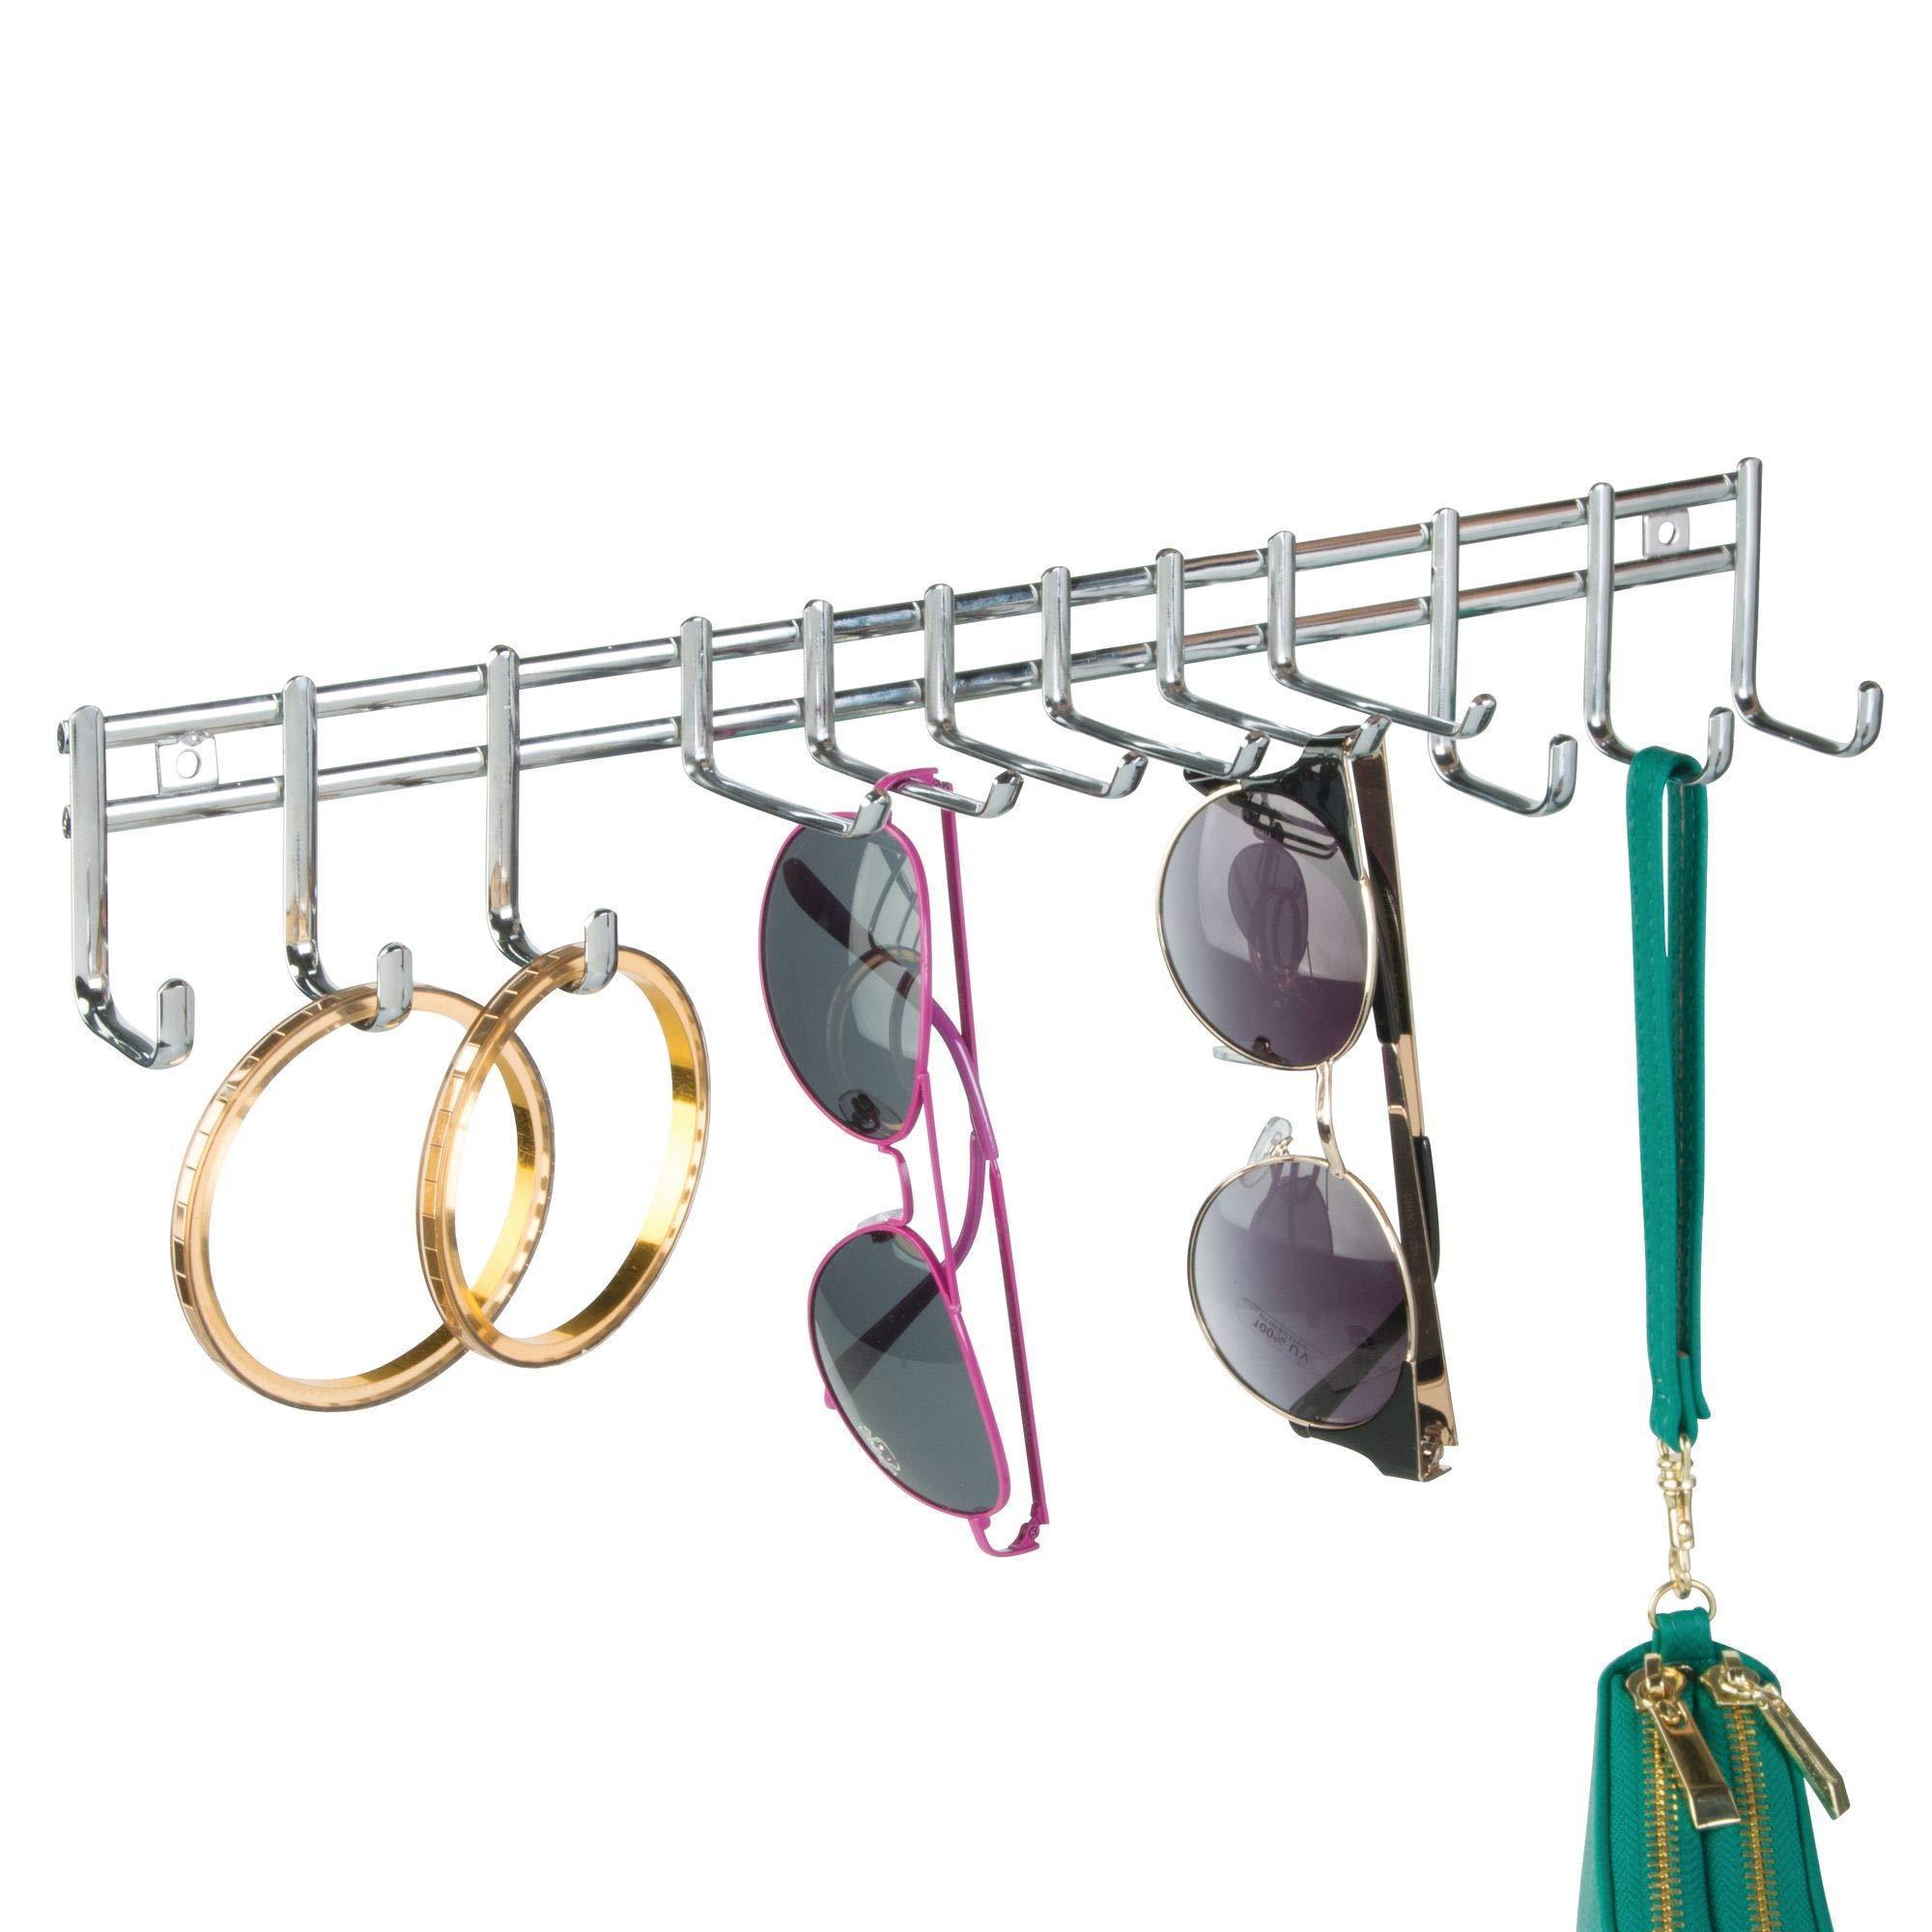 Cheap mdesign closet wall mount metal accessory organizer and storage center modern slim holder for womens and mens ties belts scarves sunglasses watches hardware included 12 hooks 2 pack chrome